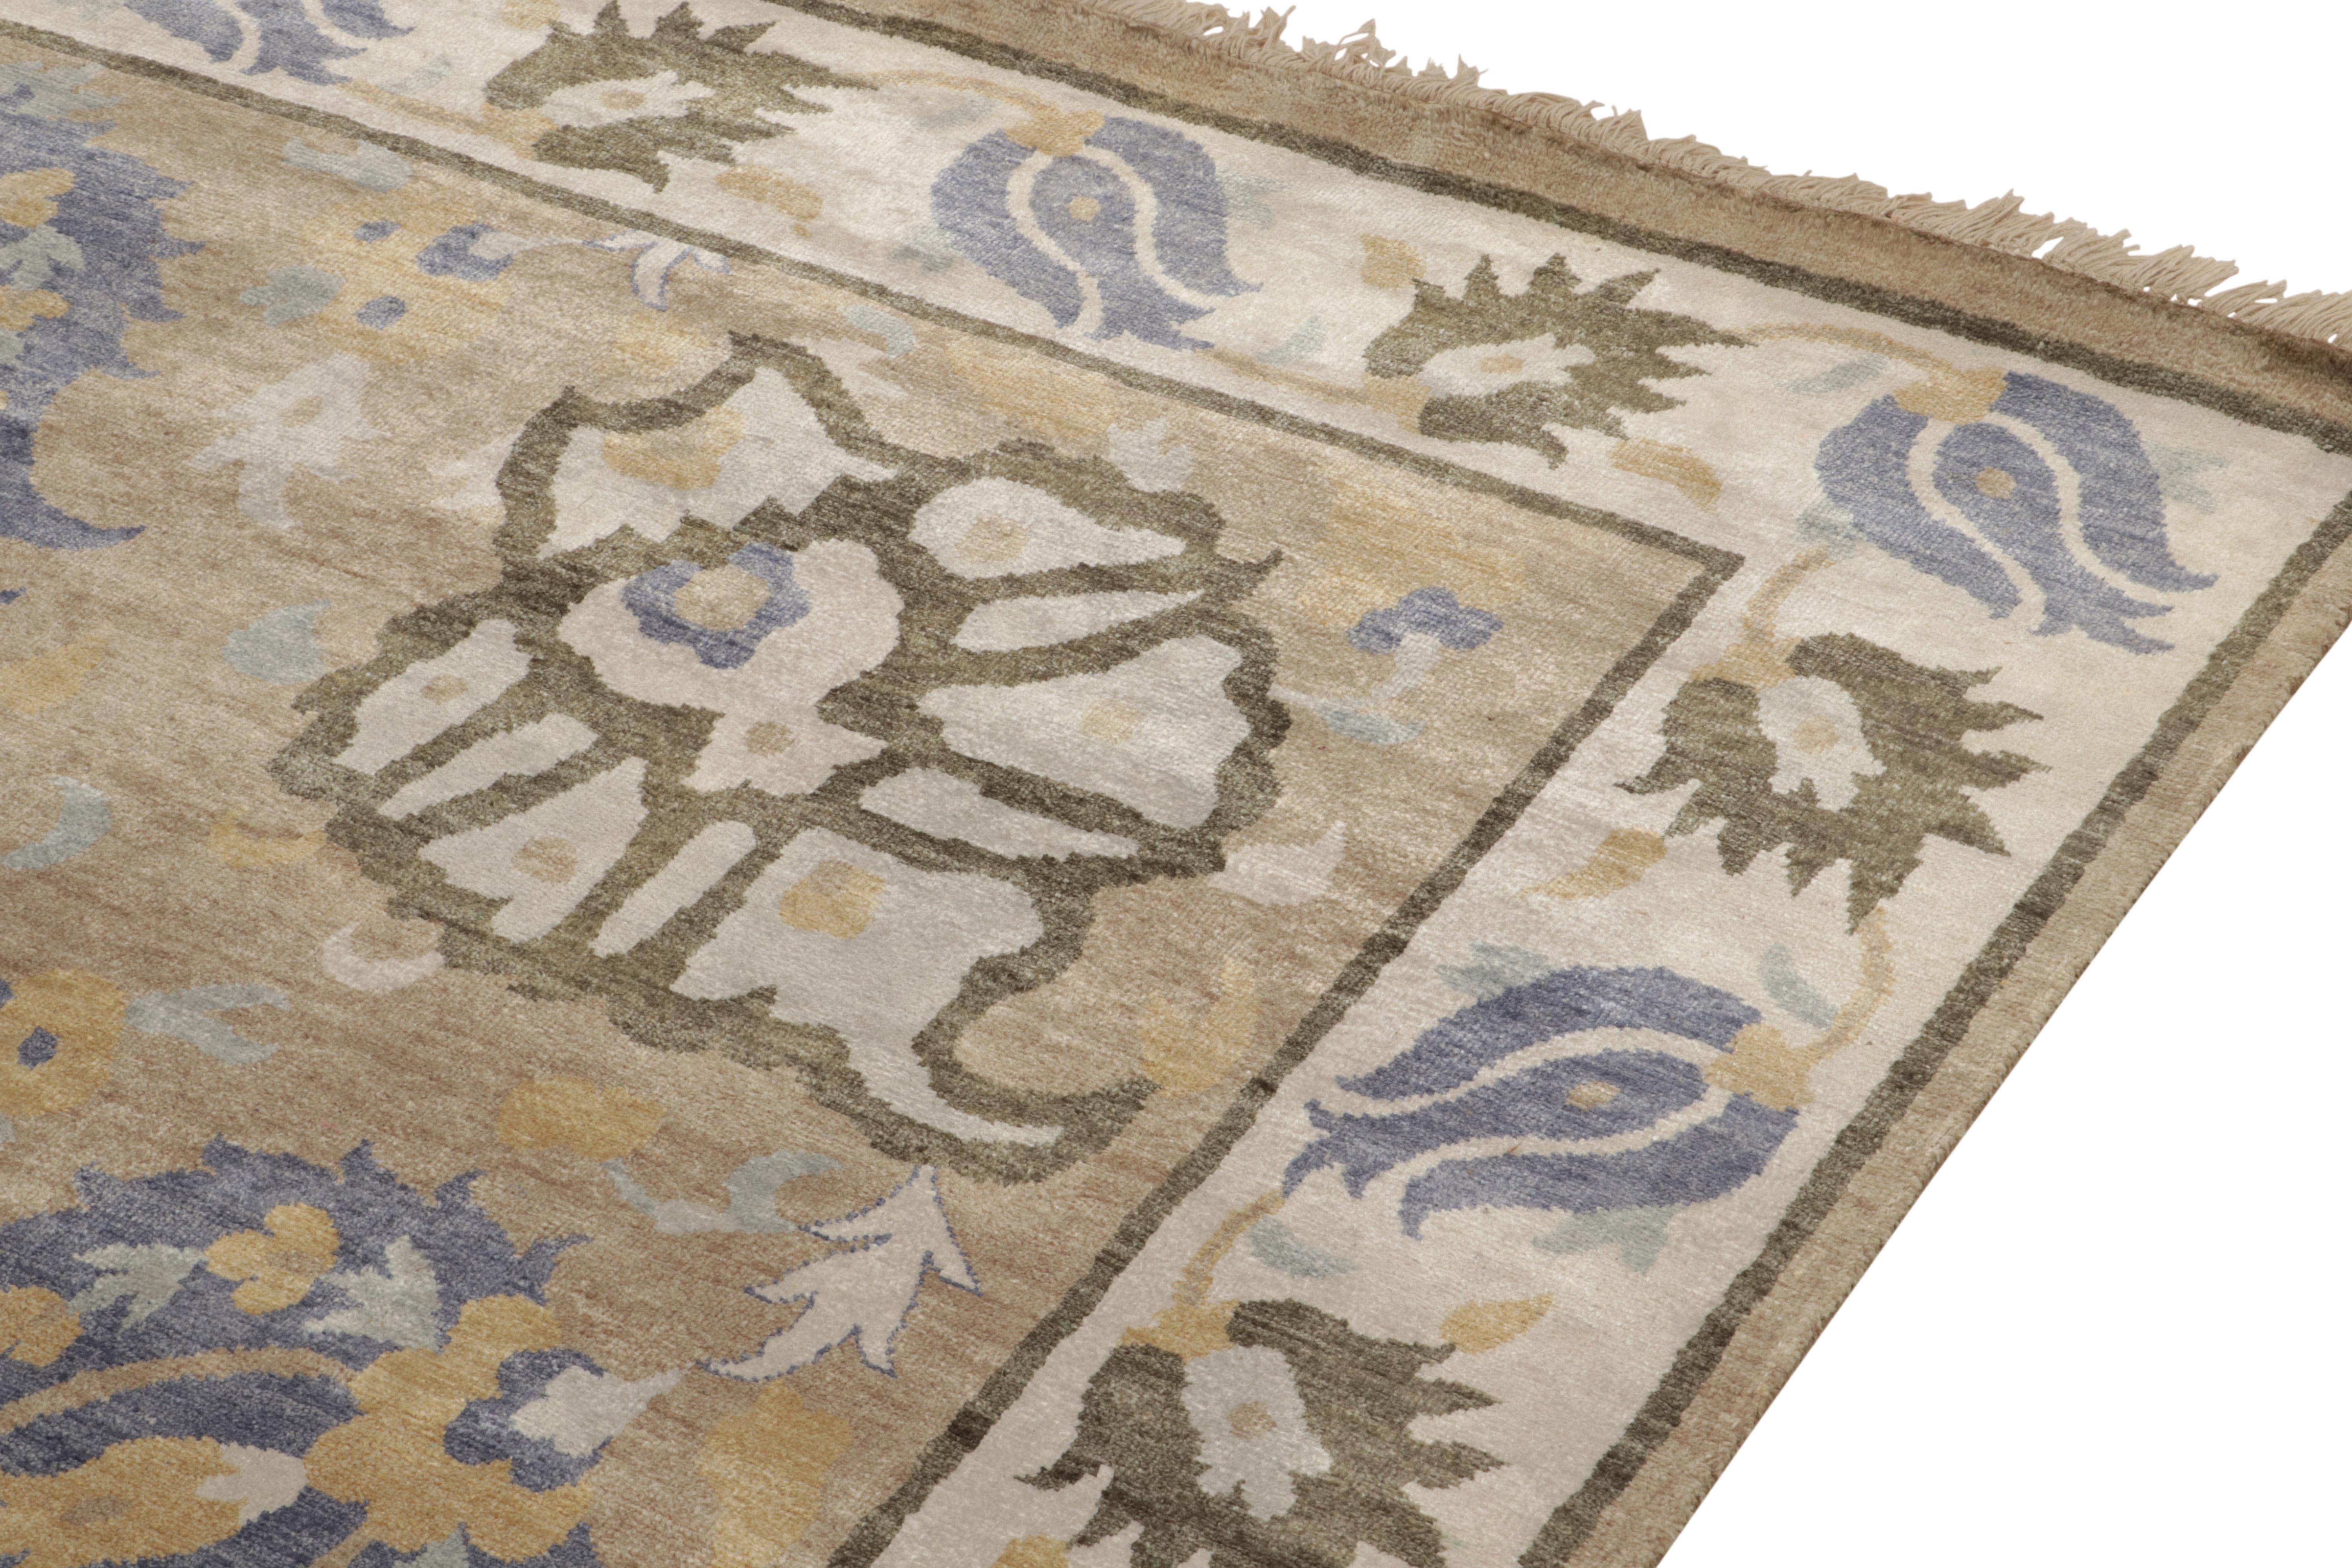 Rug & Kilim’s Transitional Rug in Beige-Brown & Blue Floral Patterns In New Condition For Sale In Long Island City, NY